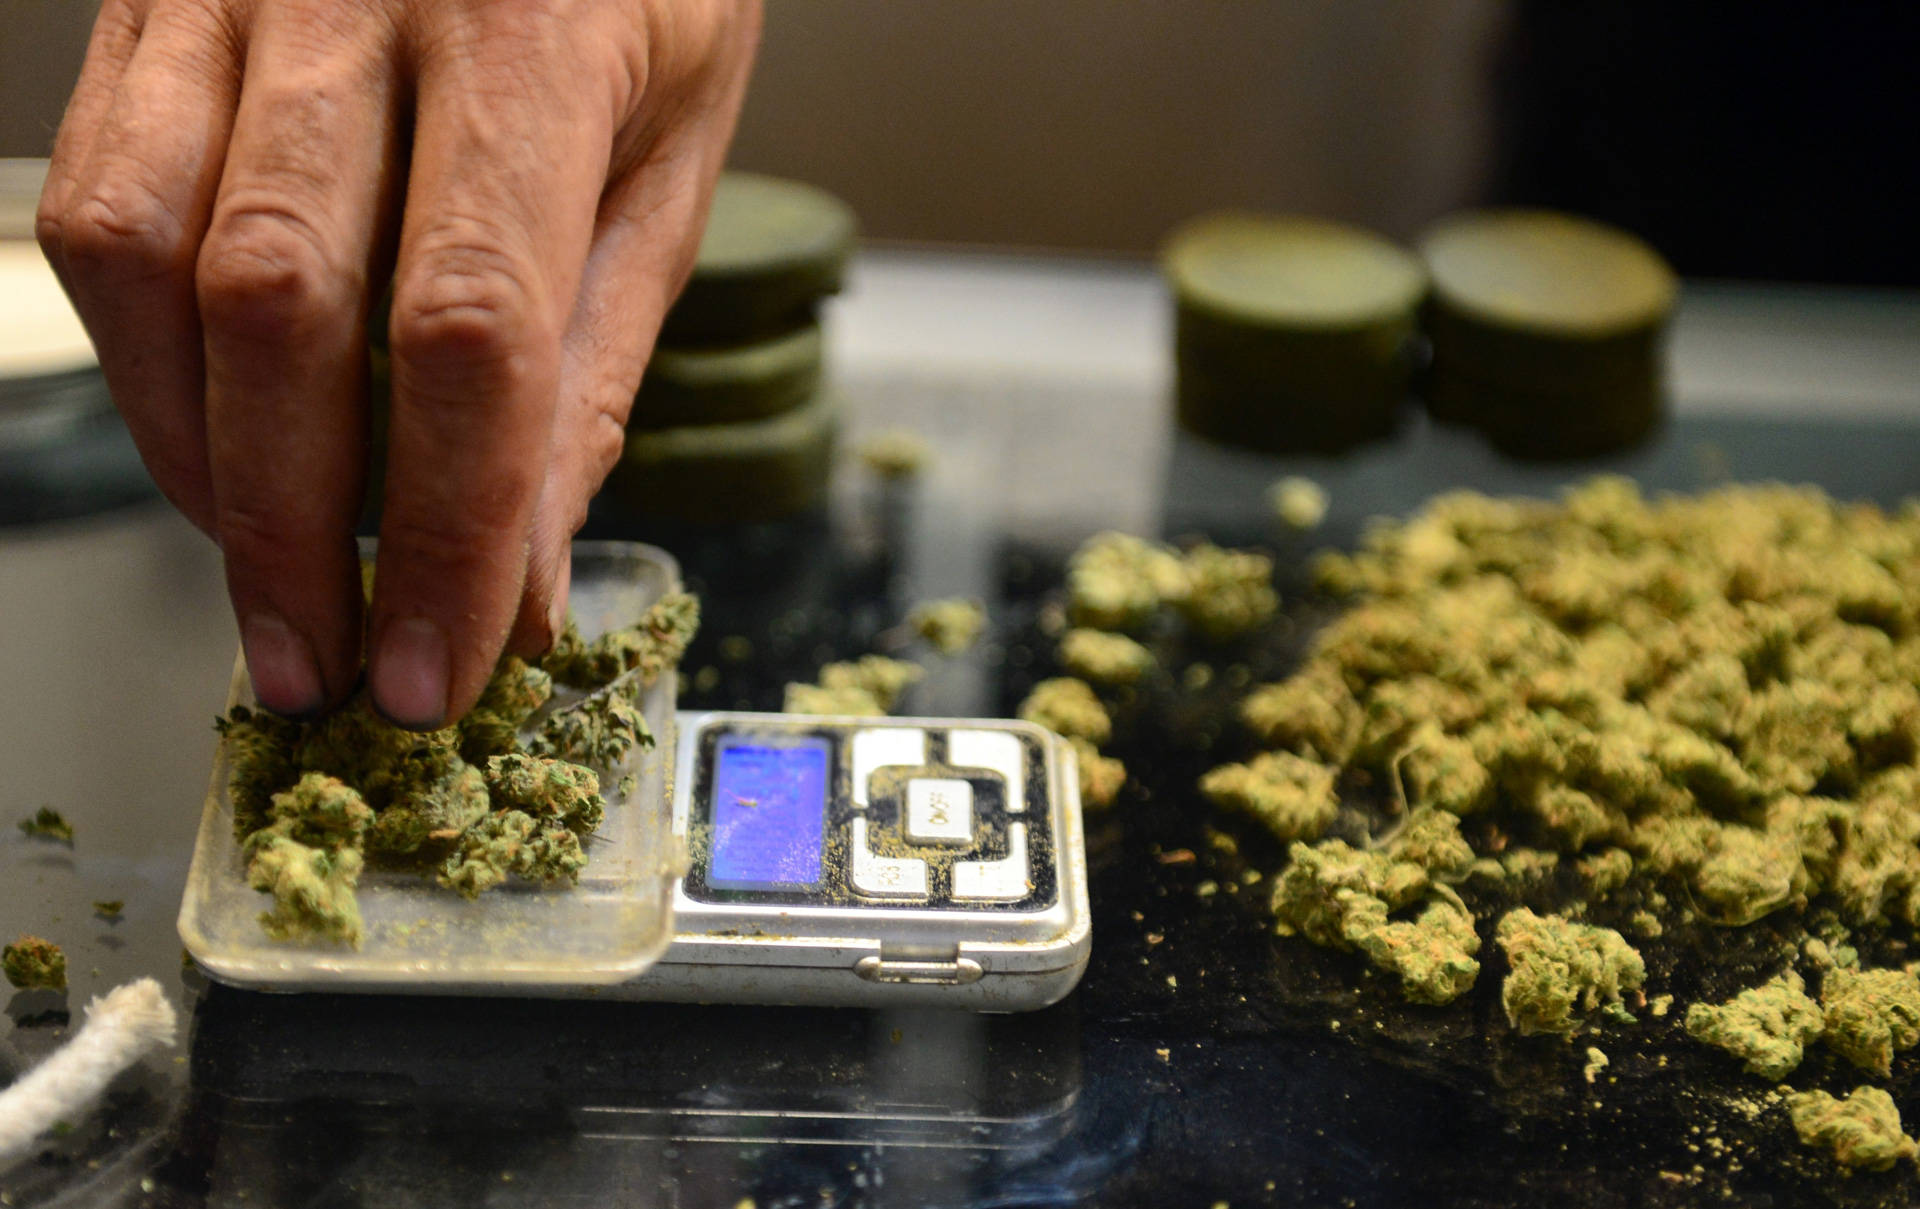 A vendor weighs marijuana buds in Los Angeles. The White House press secretary called recreational marijuana a 'very, very different subject' from medical marijuana. Frederic J. Brown/AFP/Getty Images